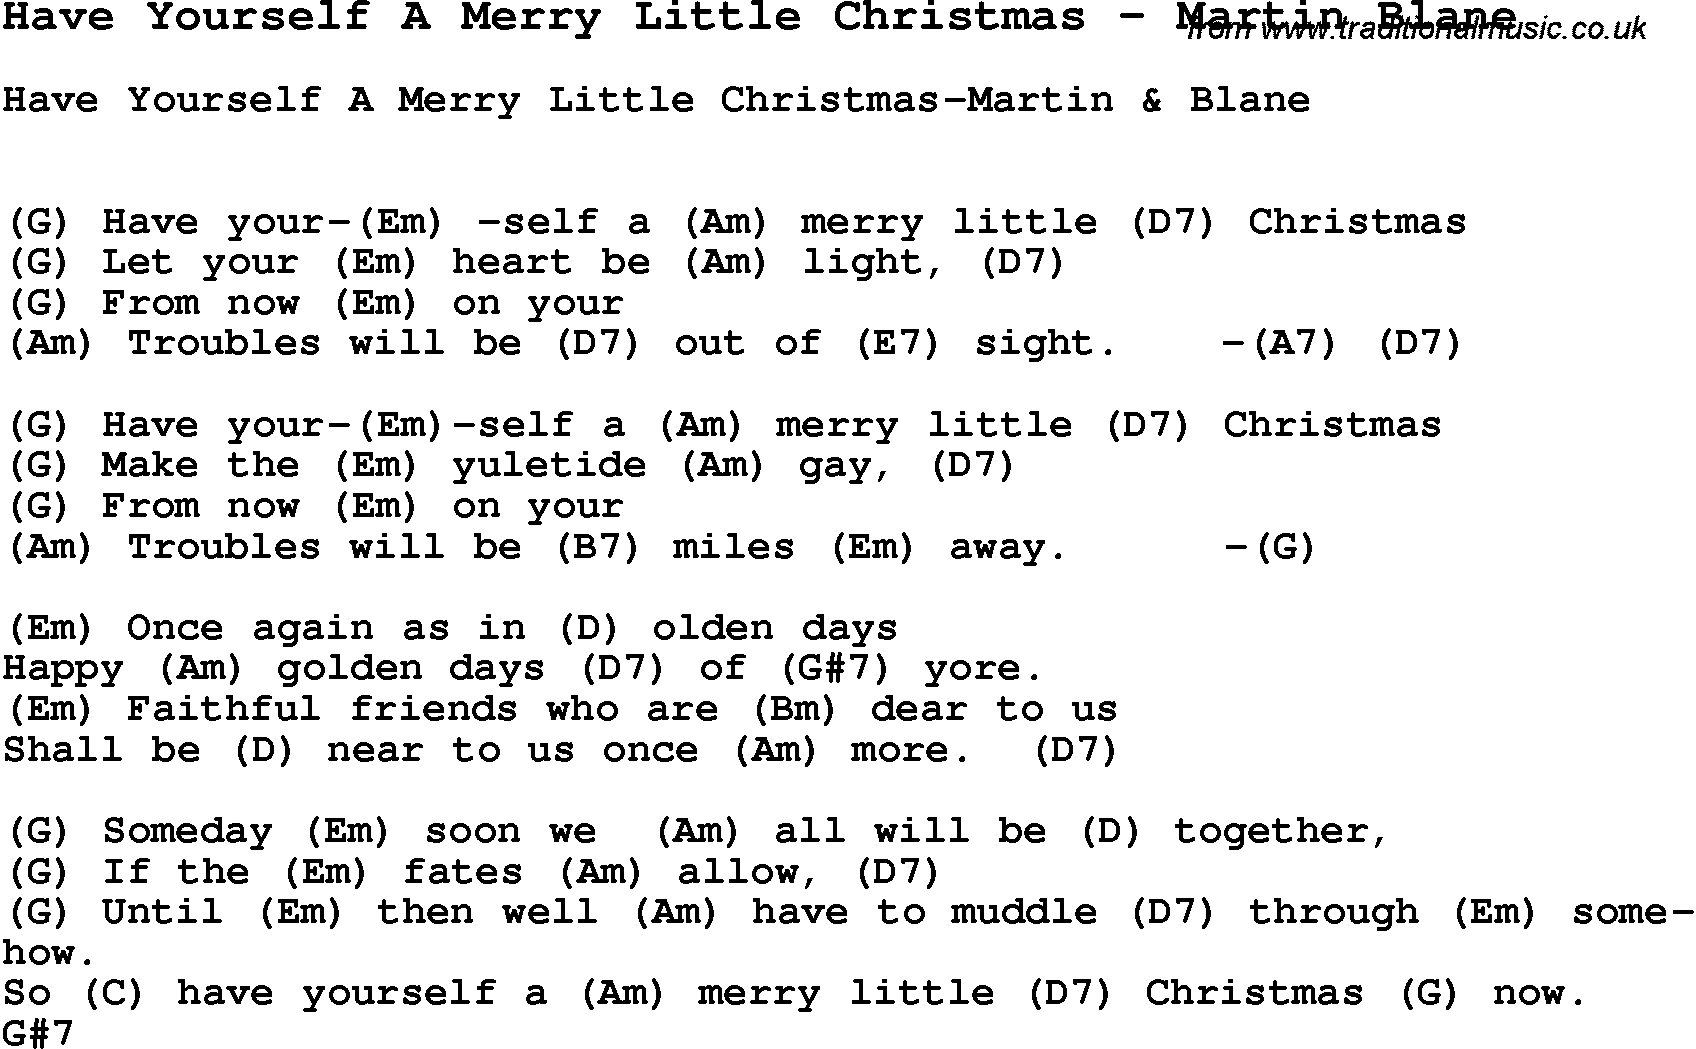 Song Have Yourself A Merry Little Christmas by Martin Blane, with lyrics for vocal performance and accompaniment chords for Ukulele, Guitar Banjo etc.